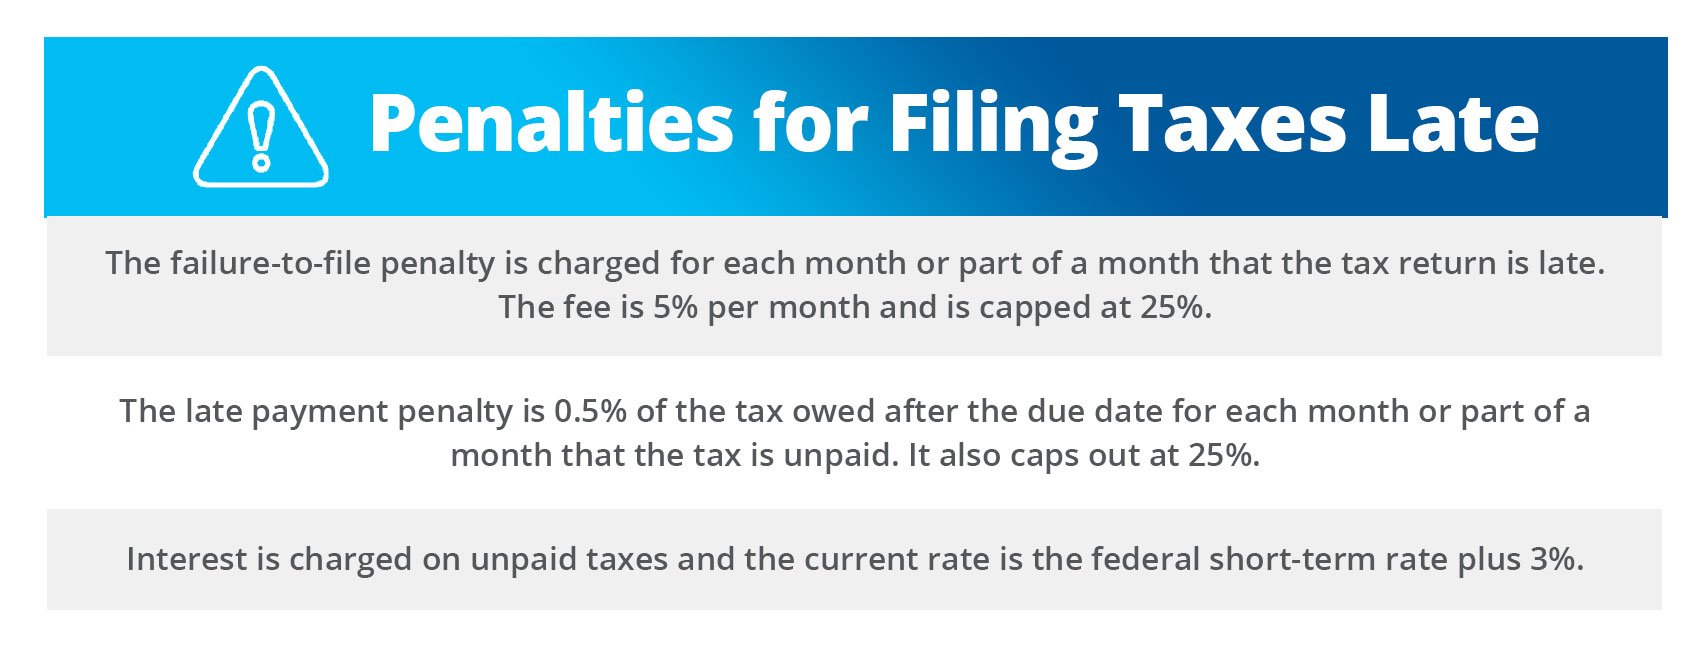 Penalties for filing taxes late